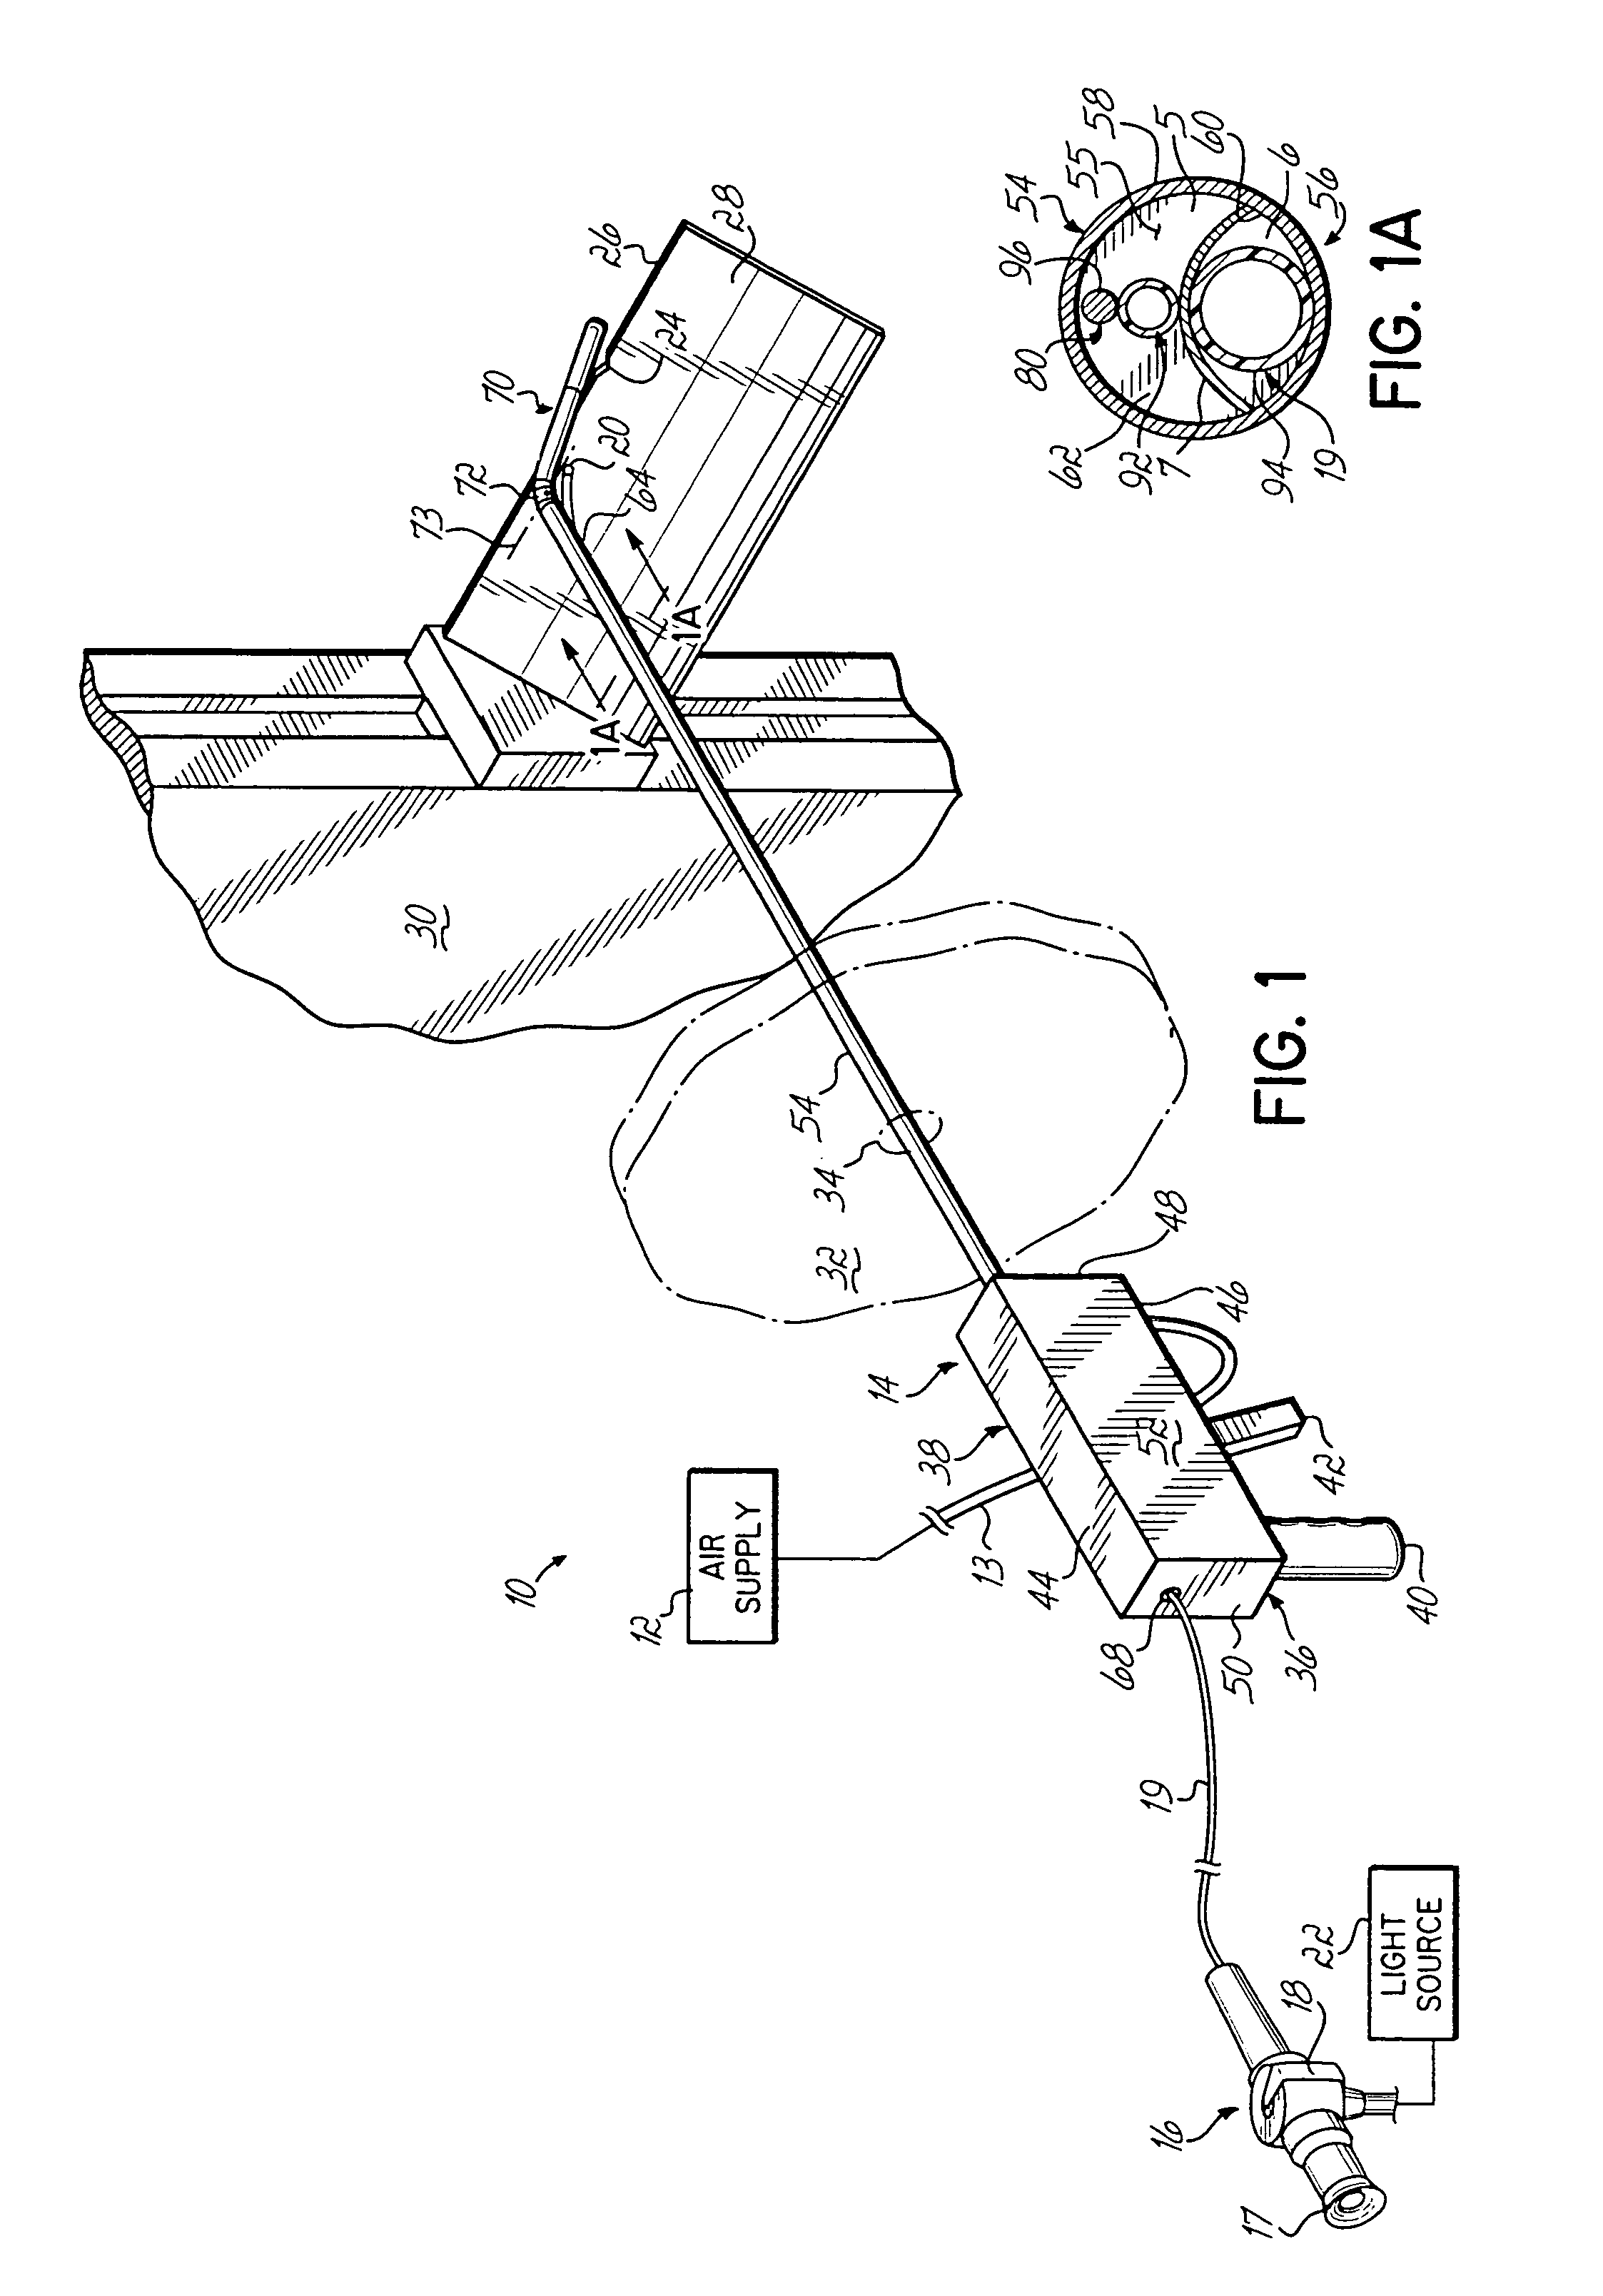 Grinding apparatus for blending defects on turbine blades and associated method of use